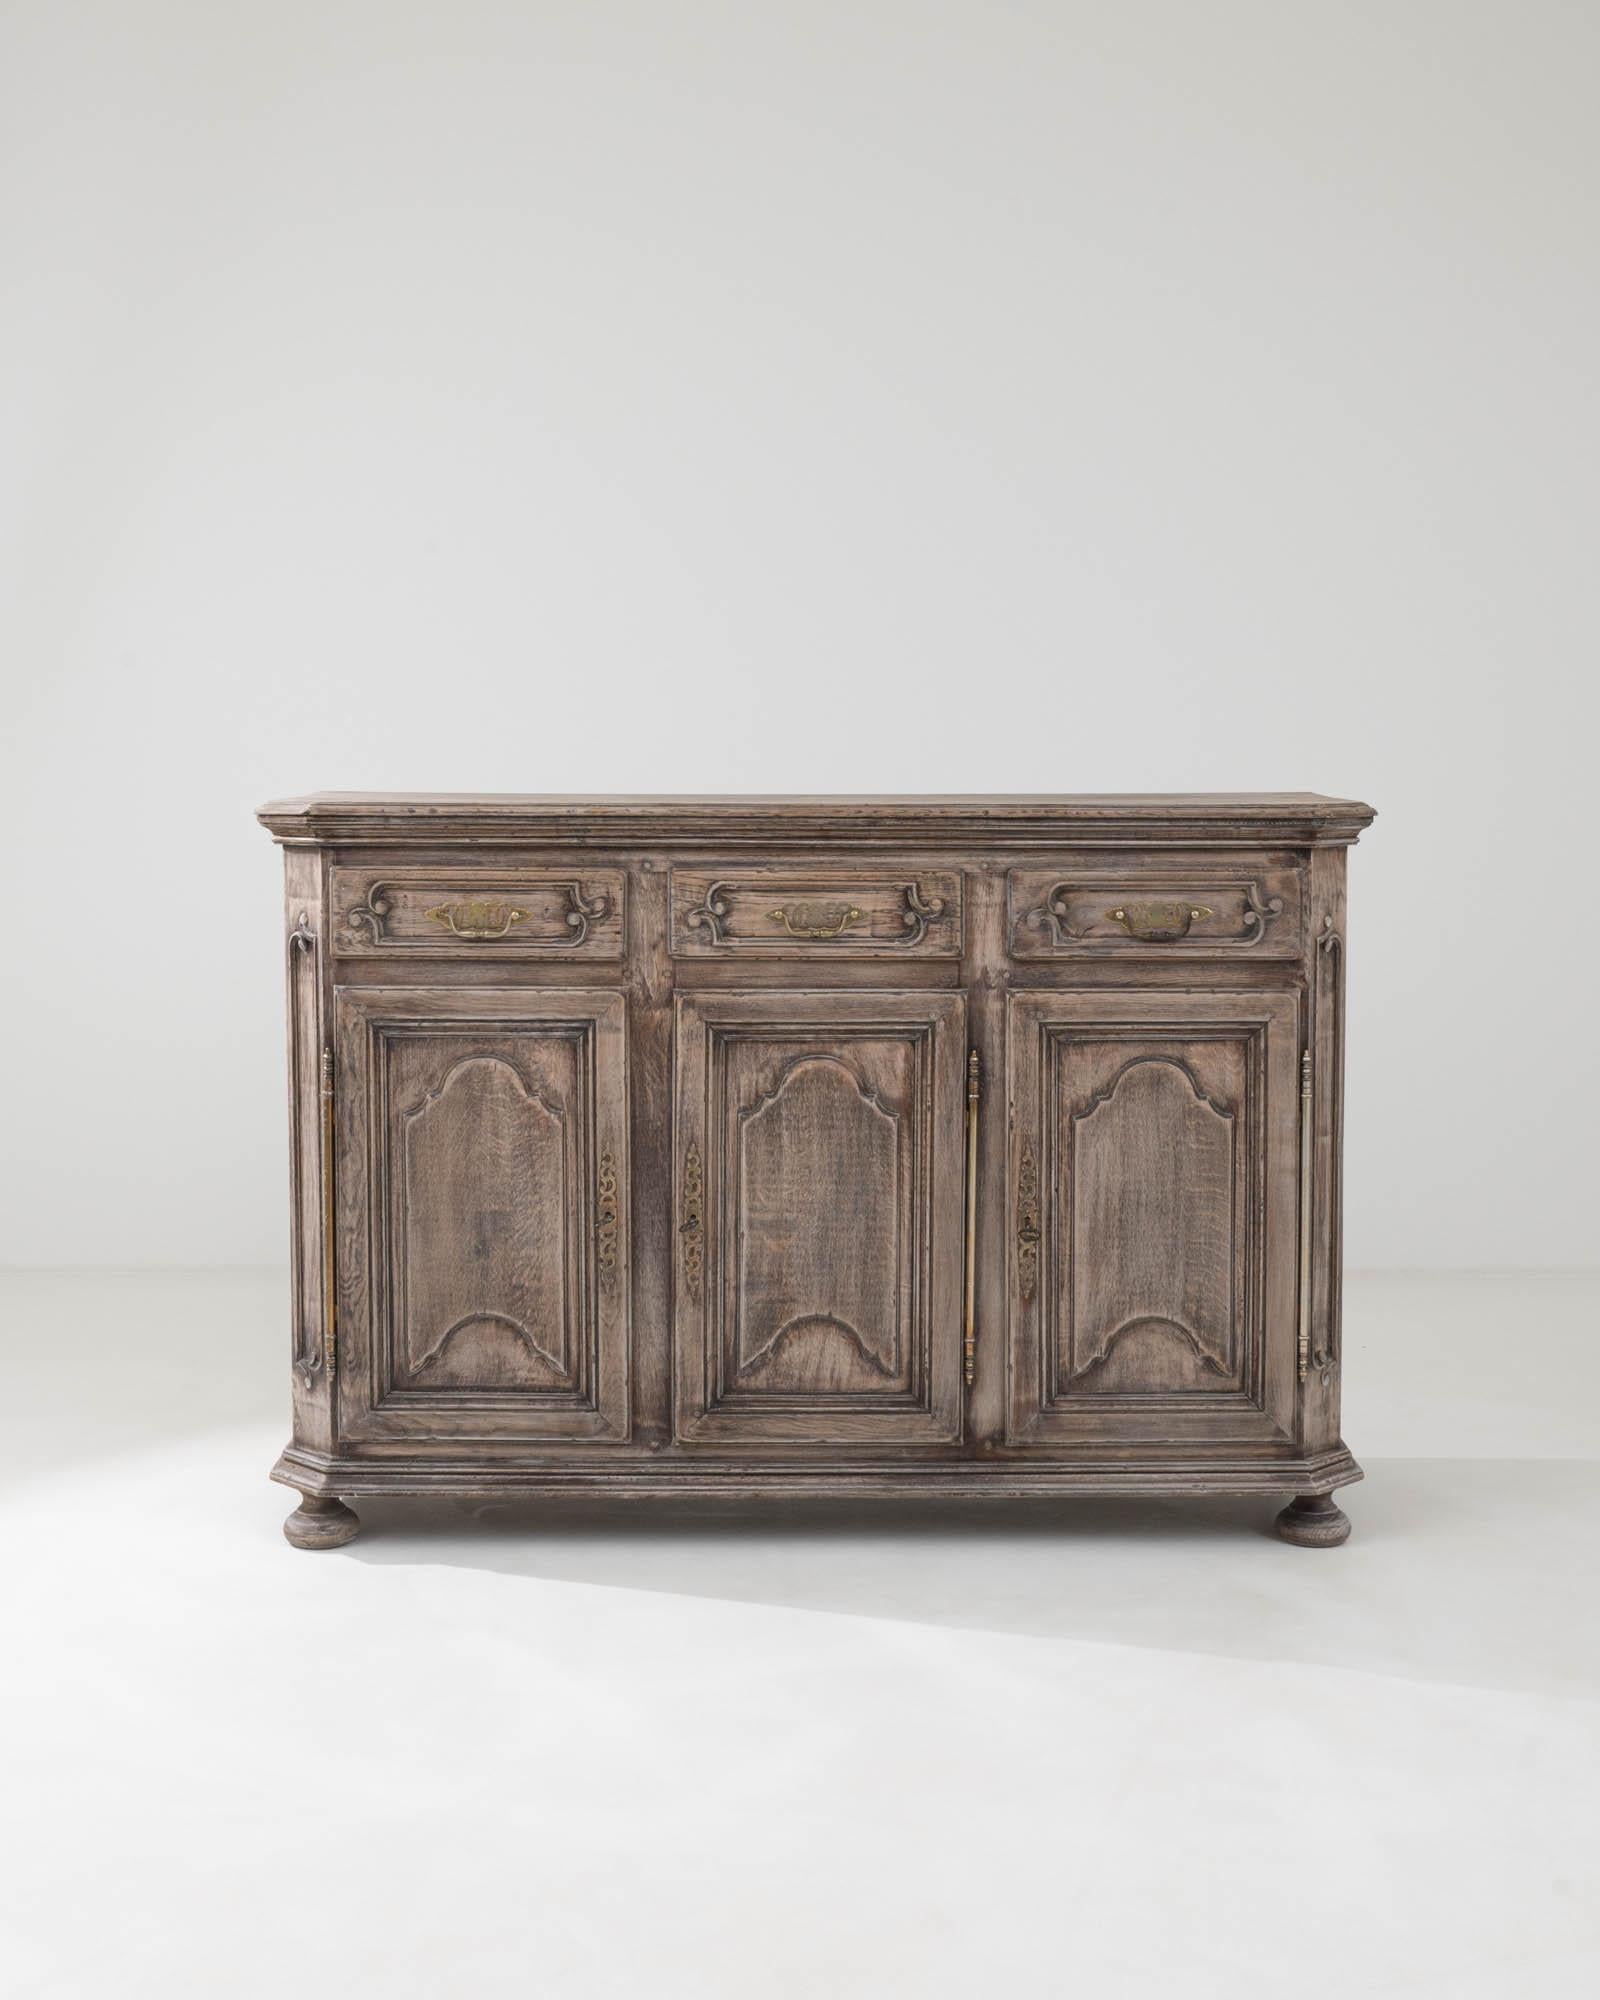 This early 19th Century French bleached oak buffet exudes a sense of rustic grandeur and timeless charm. The robust silhouette, defined by a sturdy plinth base and elegant molding, is softened by the gently weathered finish of the bleached oak,